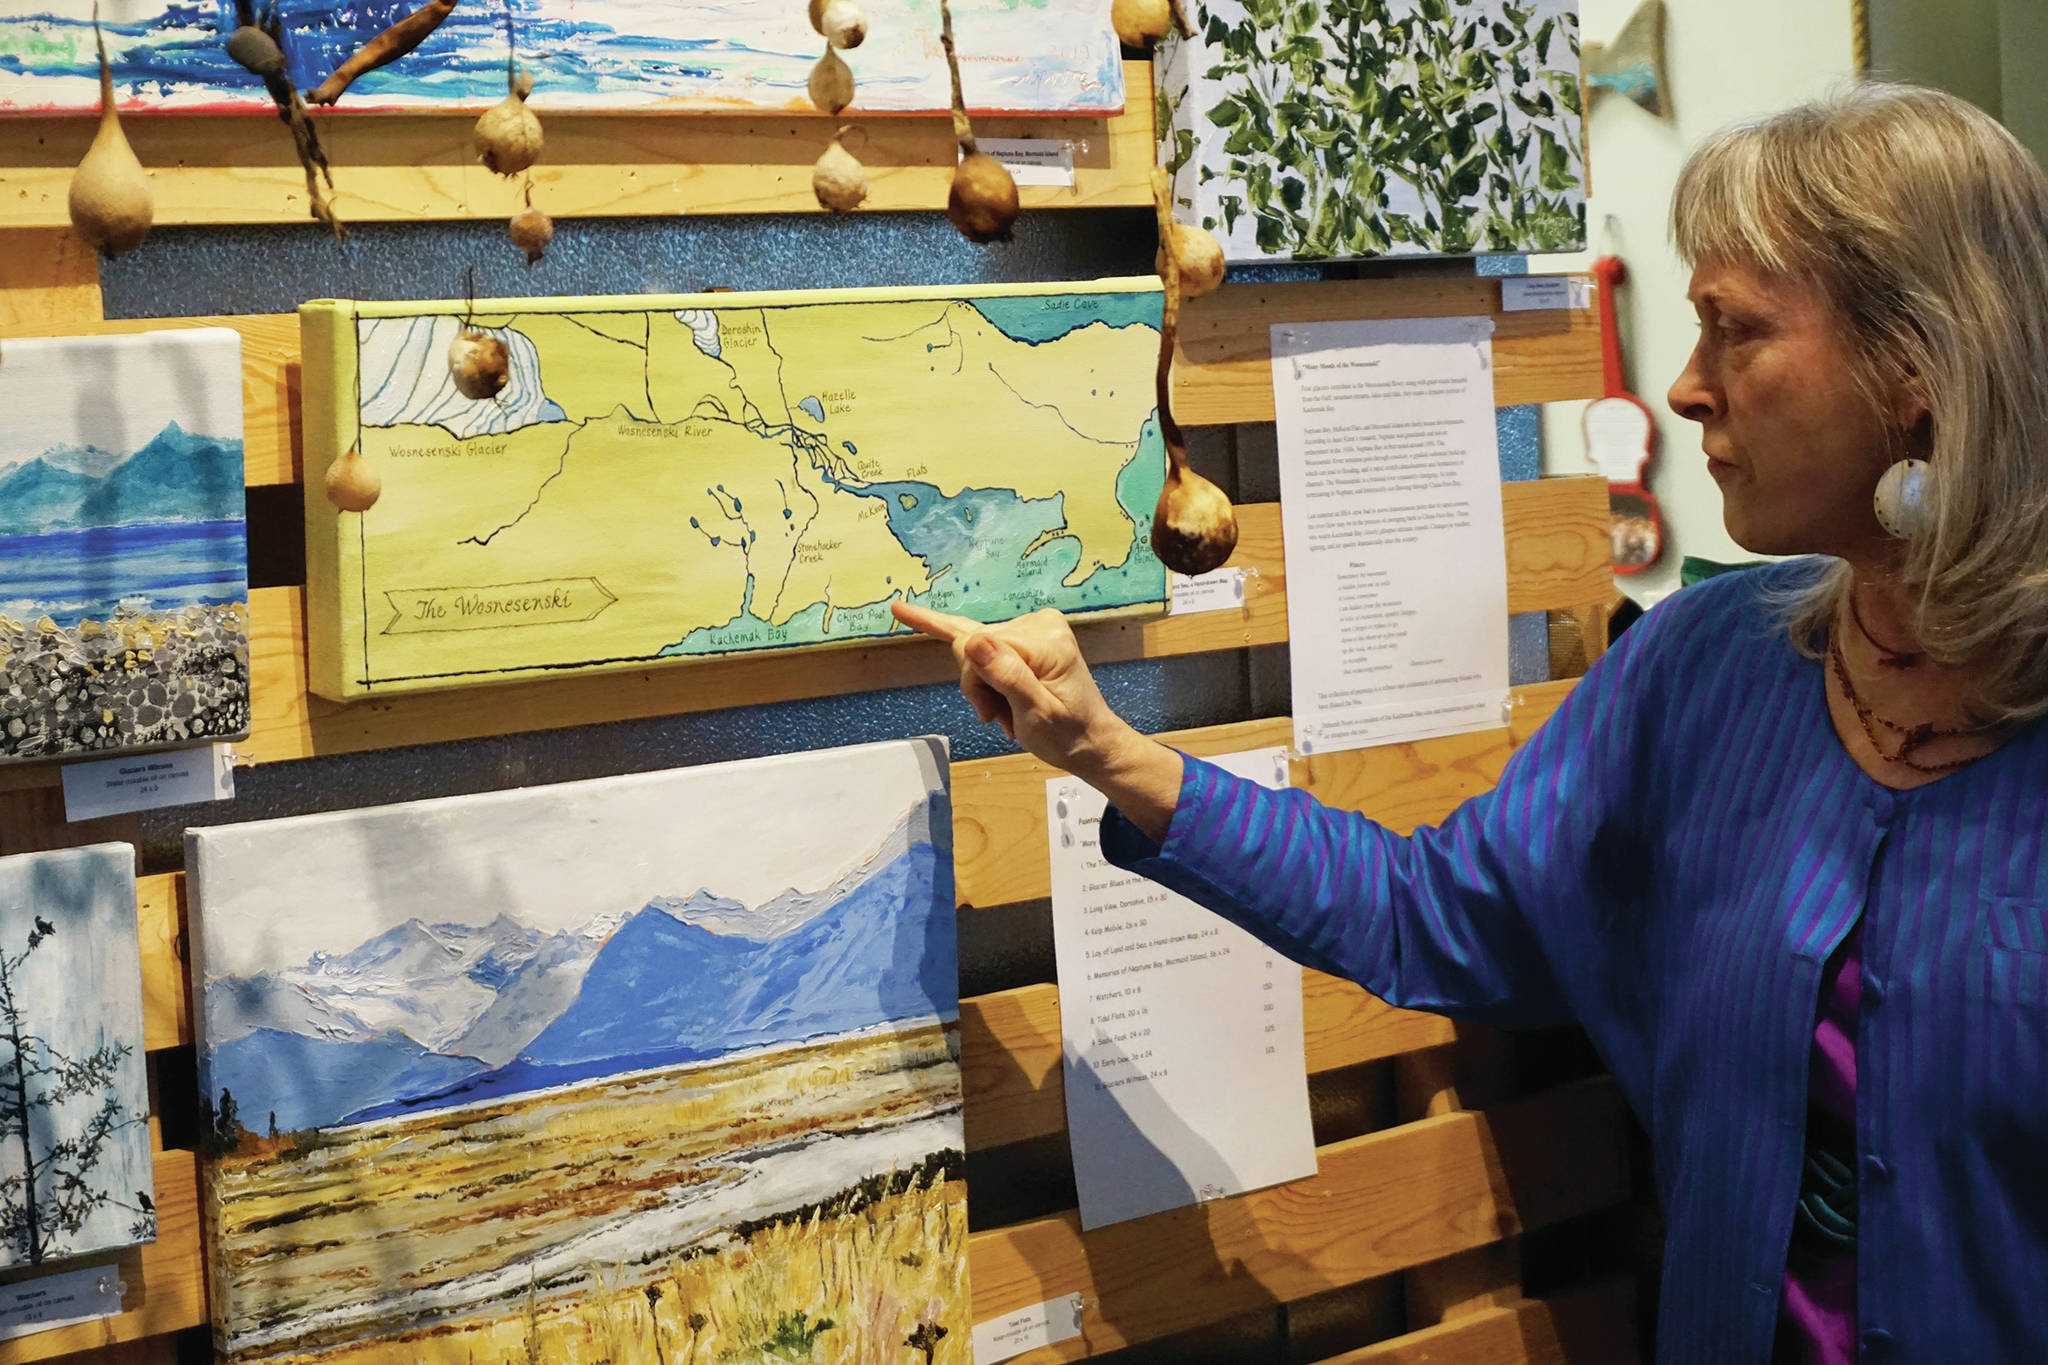 Deborah Poore discusses one of her paintings at the Friday, Feb. 7, 2020, opening of her show, “Many Moods of the Wosnesenski” at Grace Ridge Brewery in Homer, Alaska. (Photo by Michael Armstrong/Homer News)